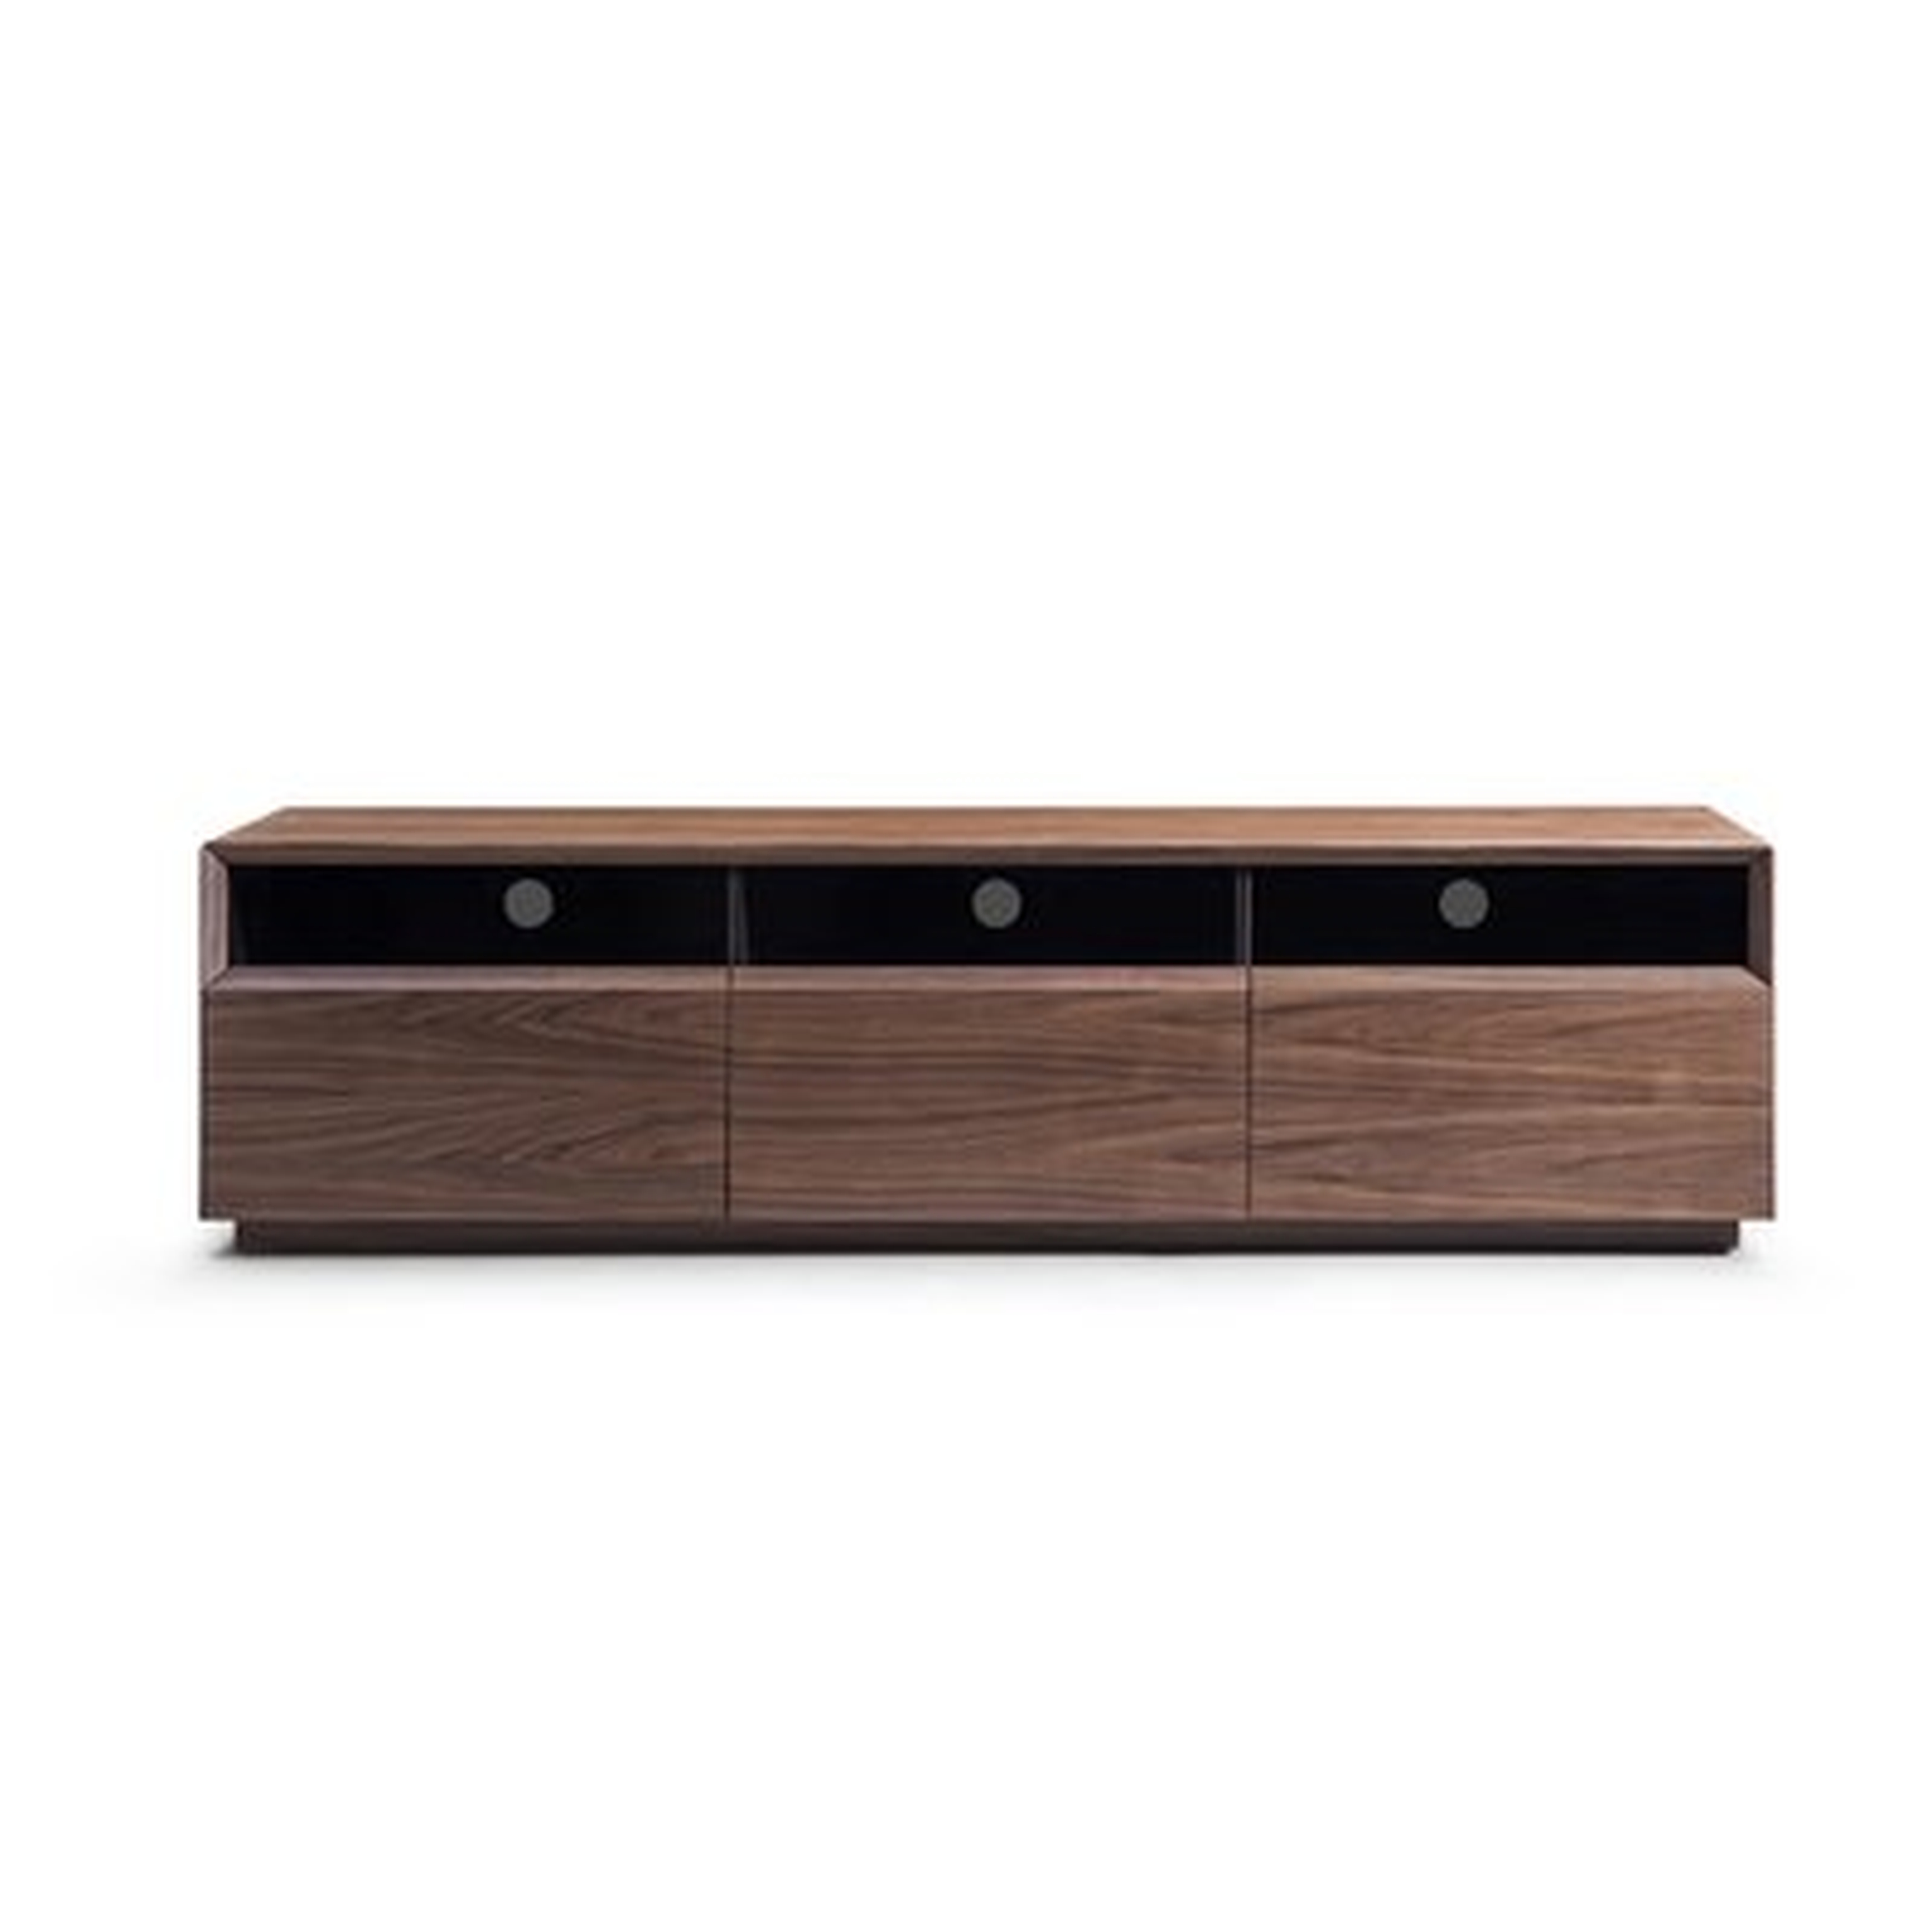 Zavier TV Stand for TVs up to 78 inches - AllModern